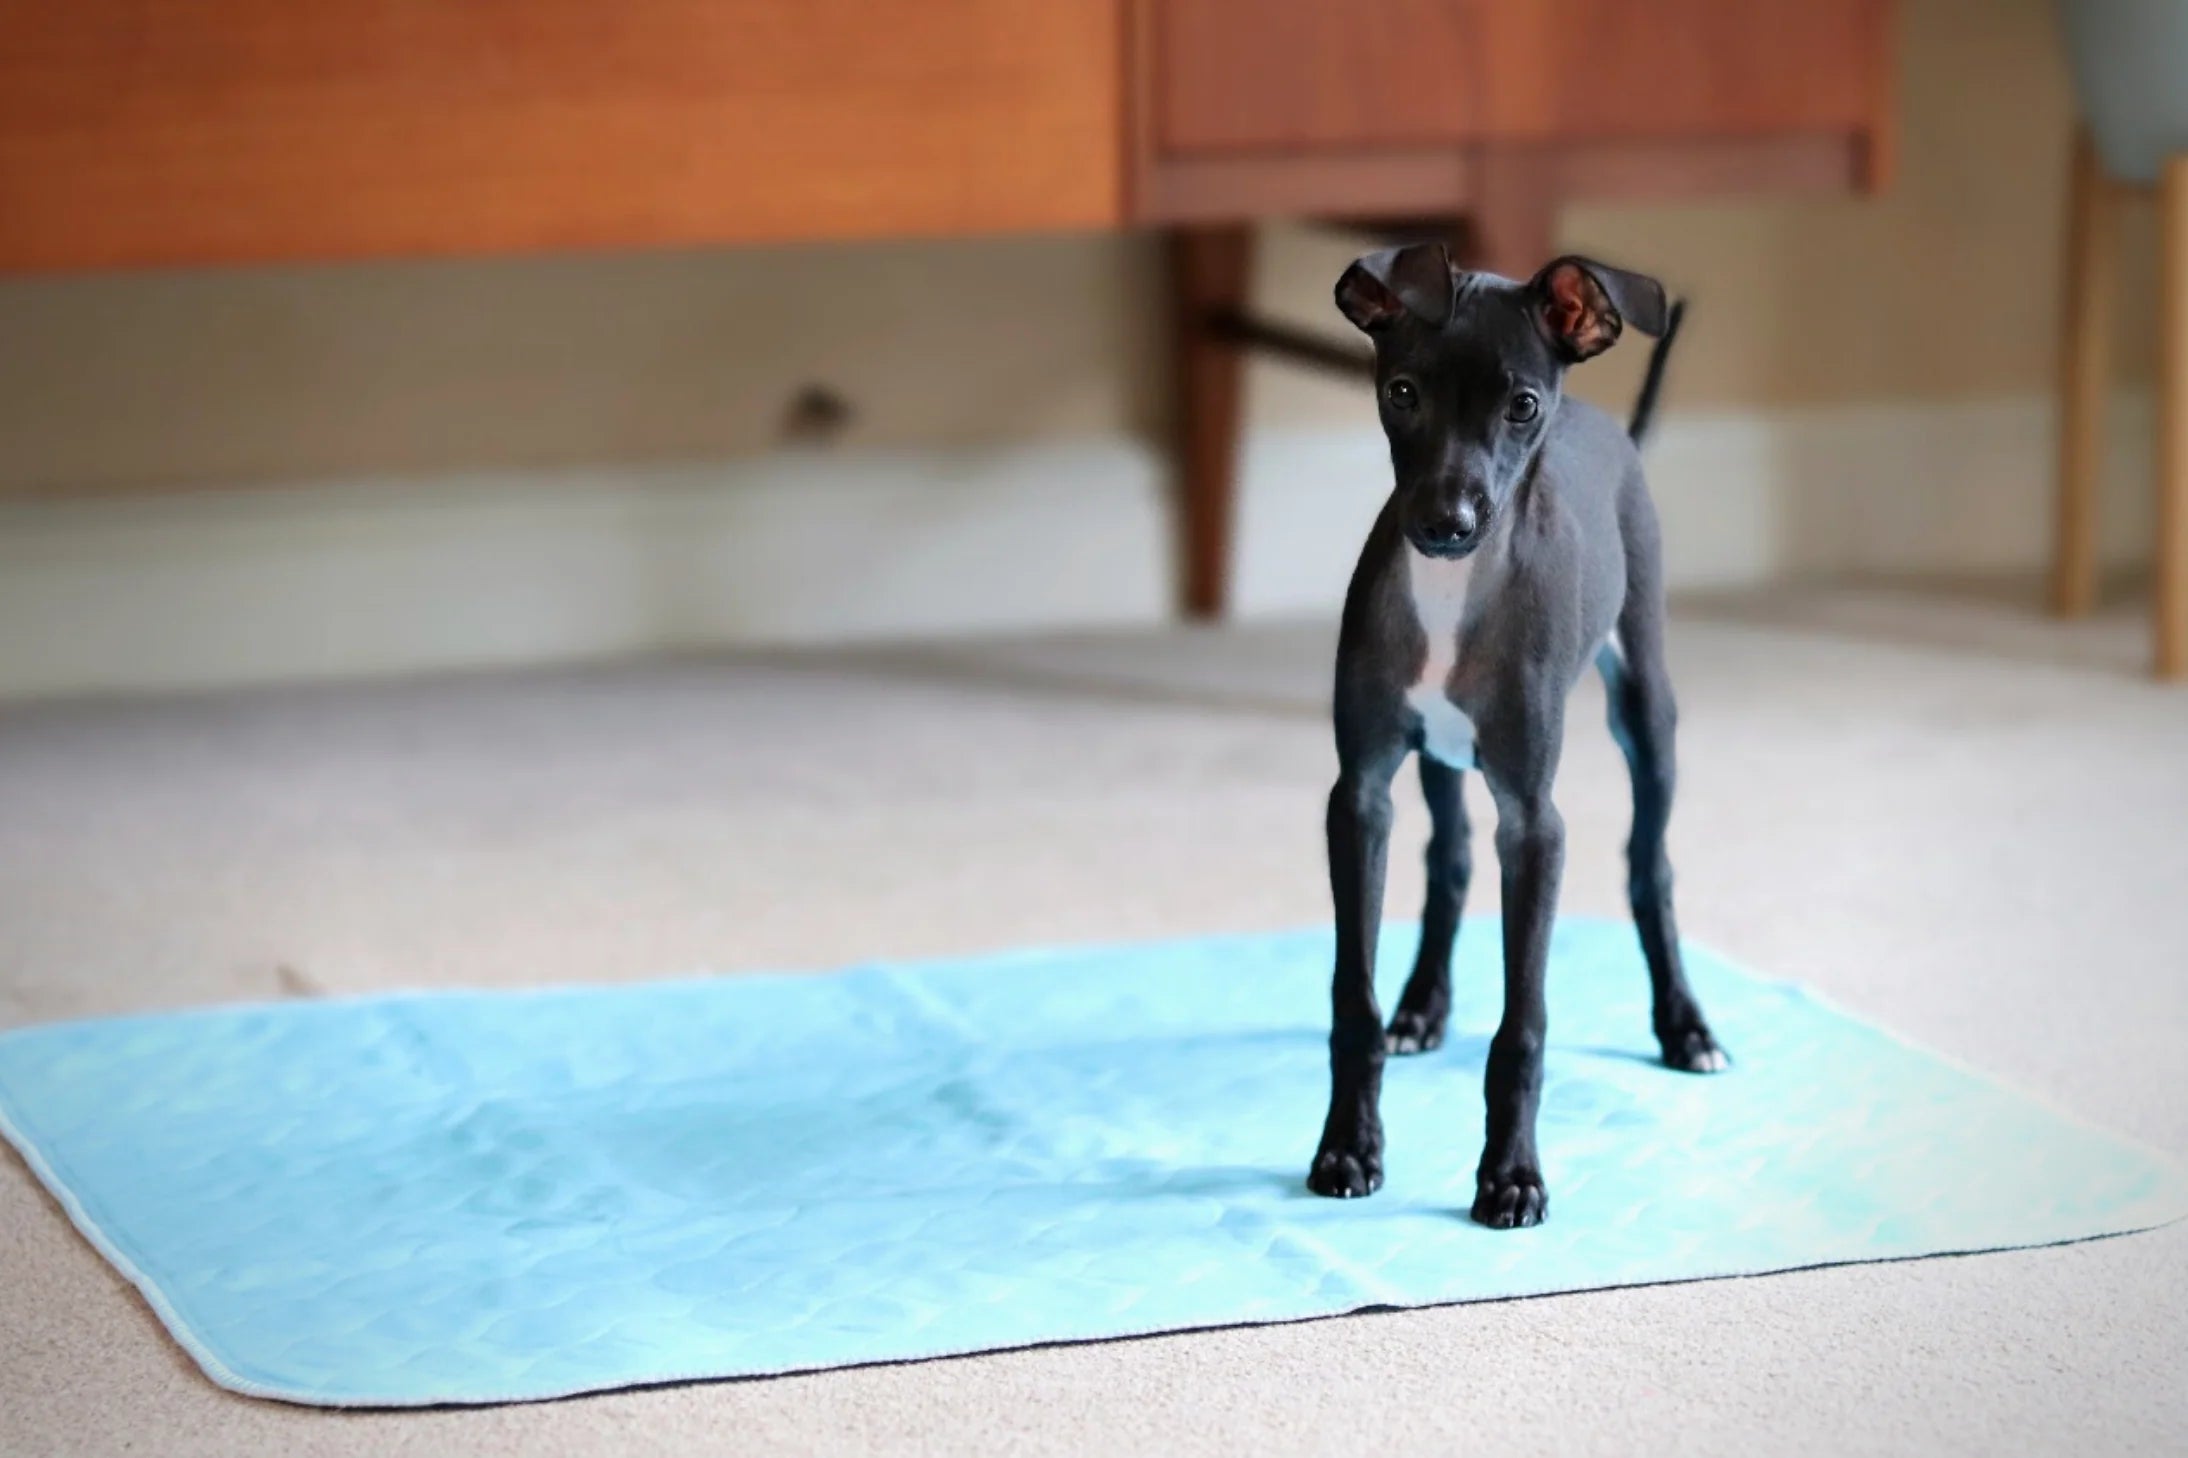 A puppy stood on a reusable puppy pad